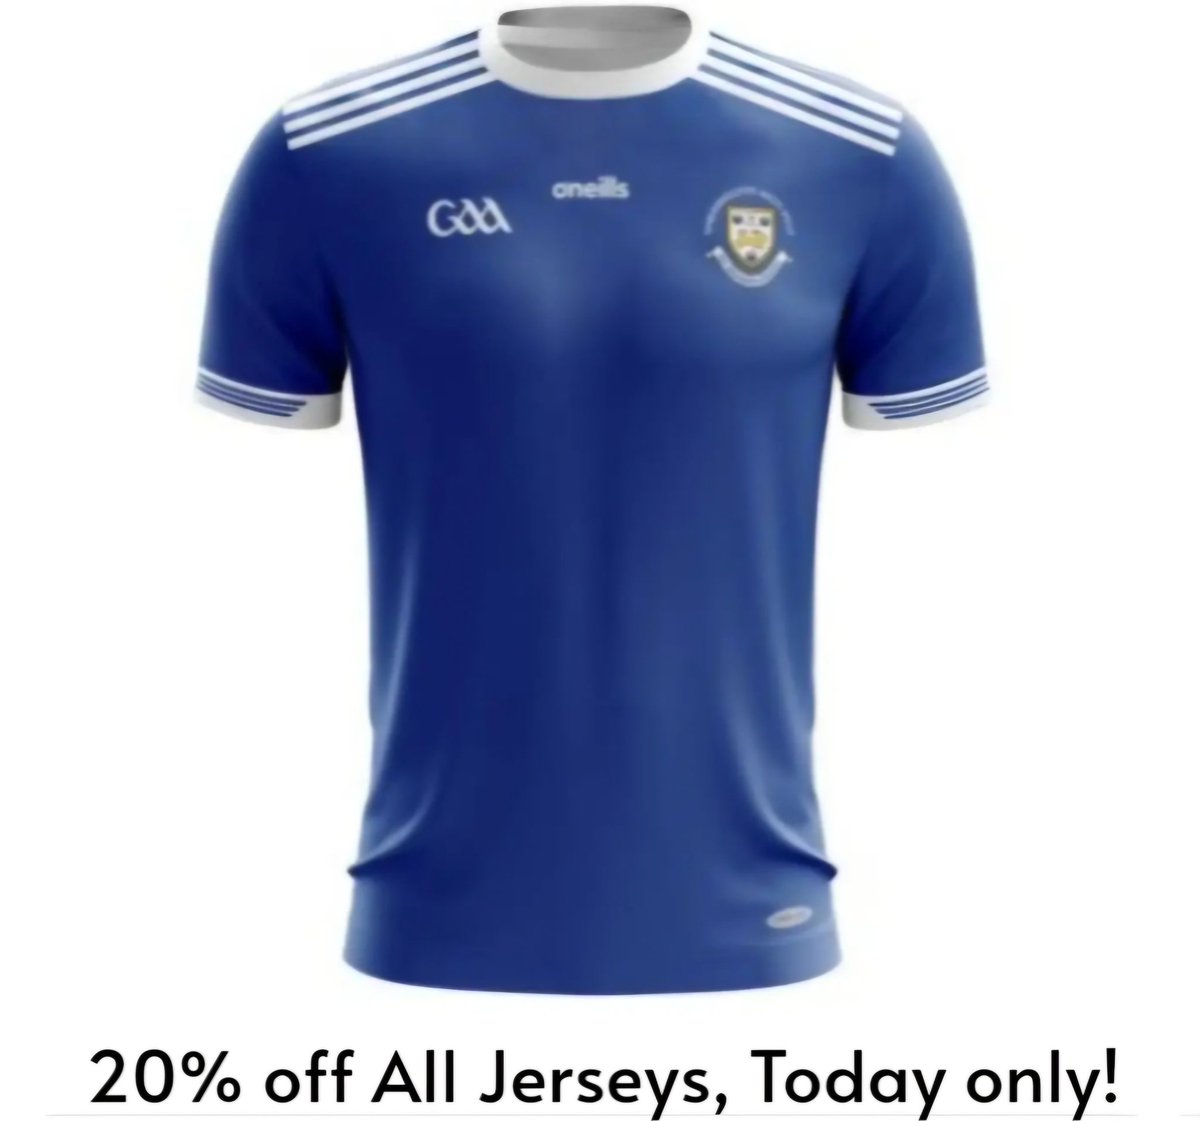 ‼️Flash Sale on all jerseys‼️ Today(Sun April 28th) only 20% off all club jerseys on the O' Neills website Follow the link below oneills.com/shop-by-team/g…